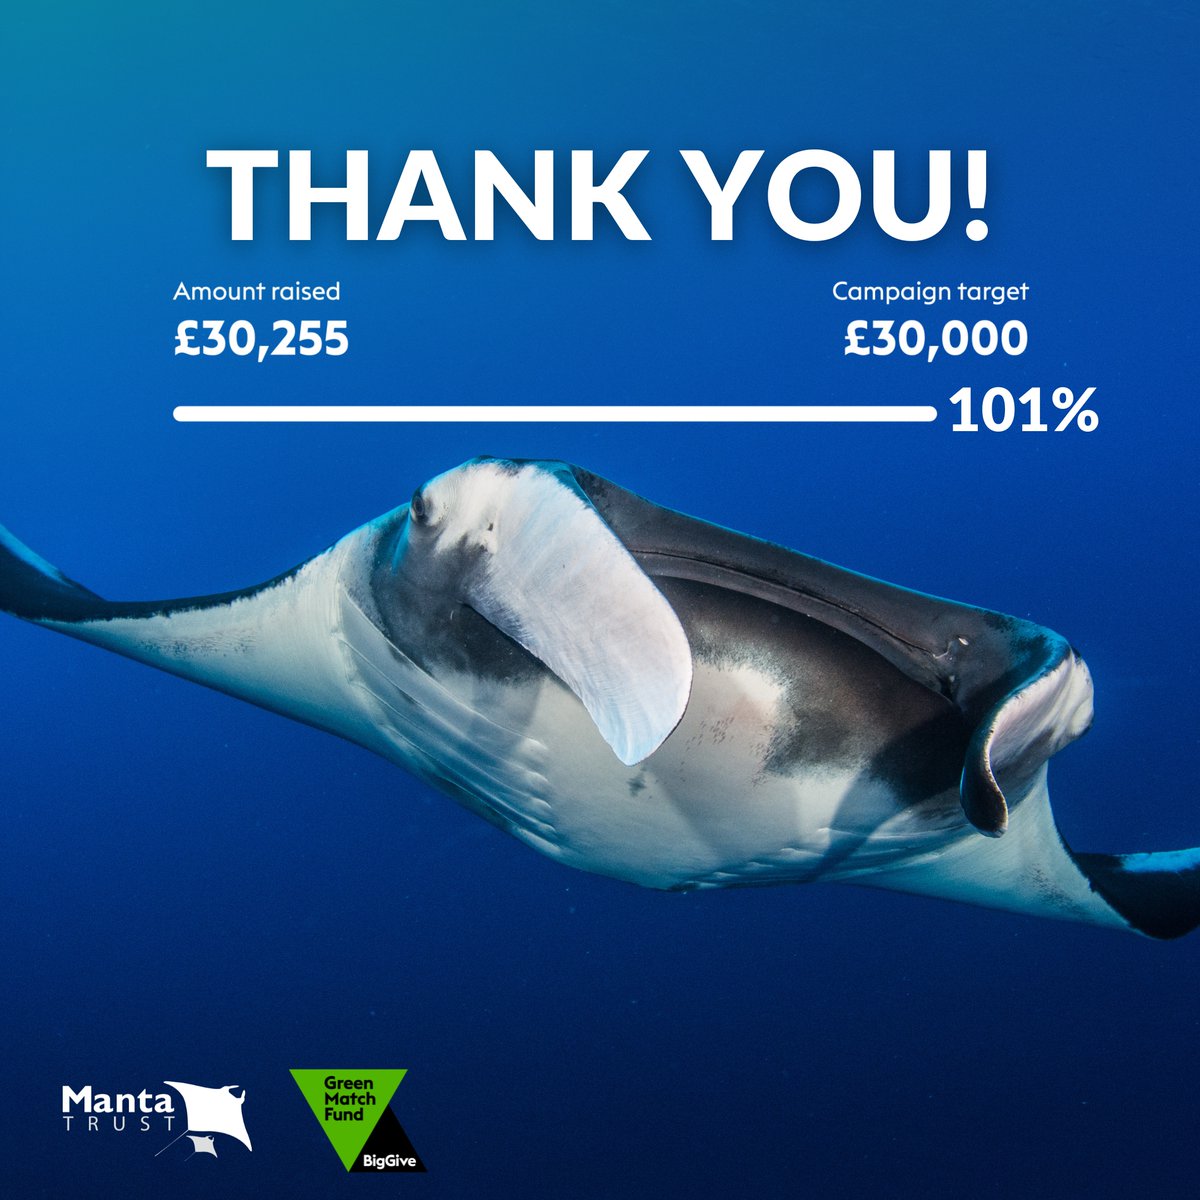 A huge thank you to everyone who donated to our campaign, your donations have been DOUBLED by The Green Match Fund and we have reached our fundraising target of £30,000! 🙏 A special thank you to our esteemed Champions, the Reed Foundation, and all our dedicated pledgers!